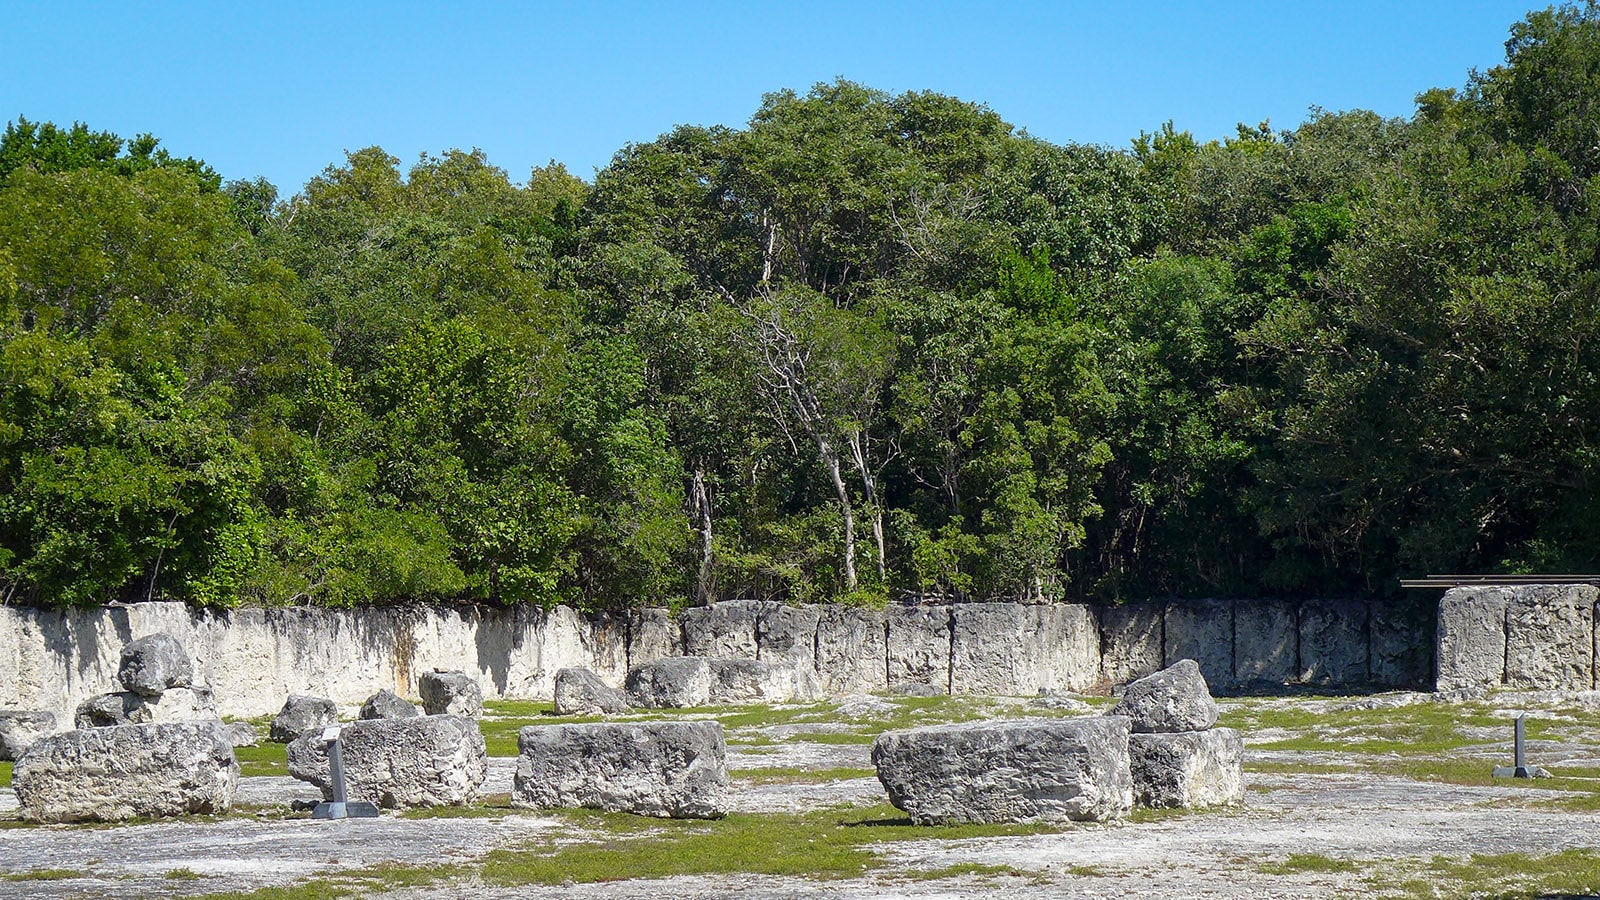 Windley Key Fossil Reef Geological State Park: A tropical hardwood hammock atop a fossilized coral reef provides an unusual cactus habitat.